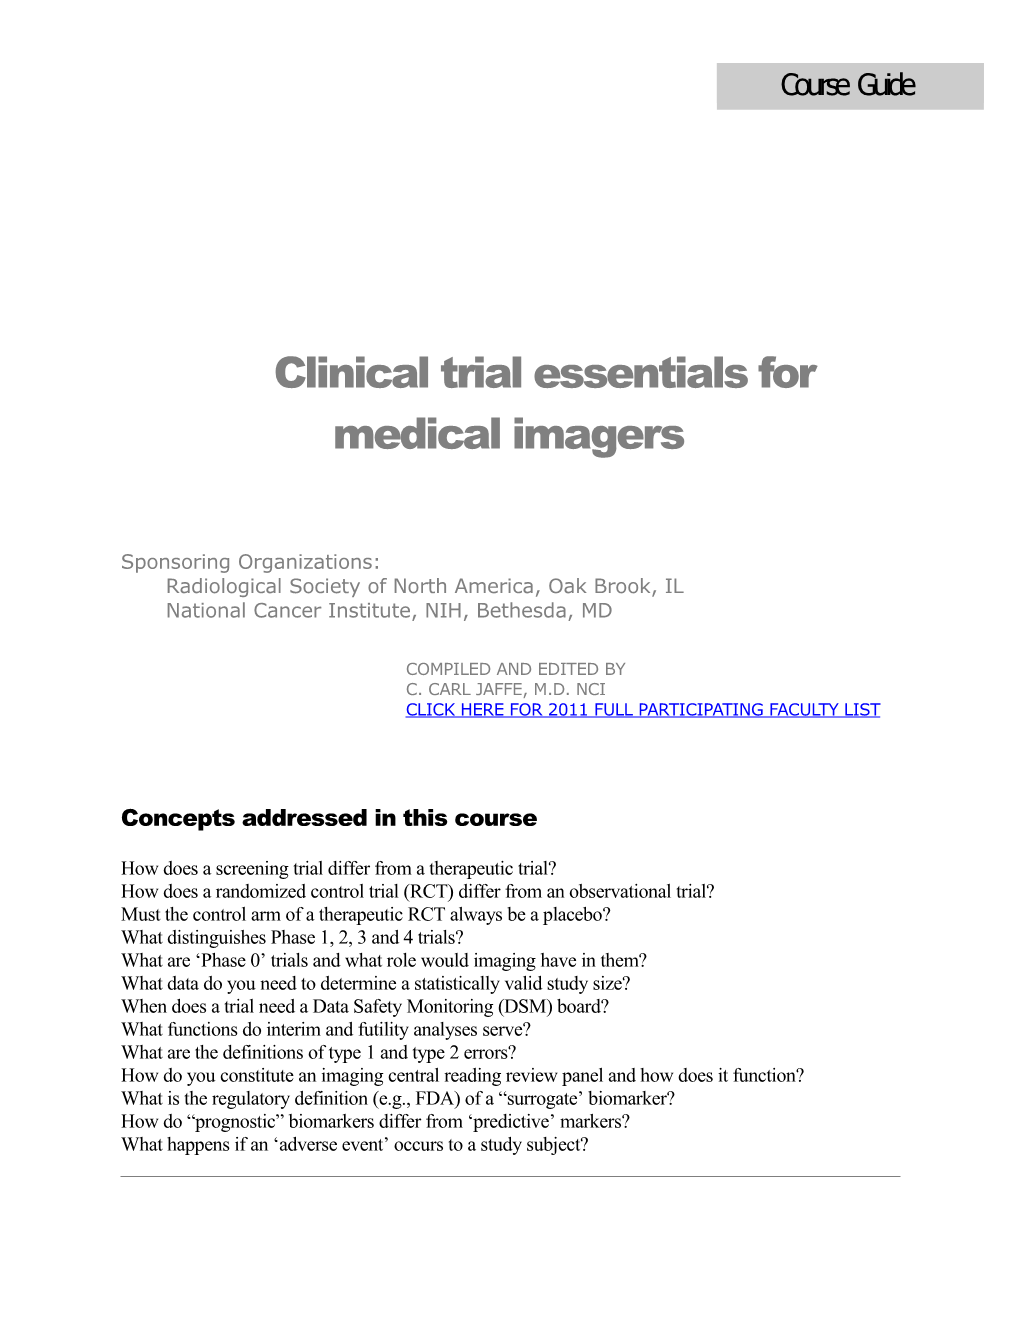 Clinical Trial Essentialsfor Medical Imagers